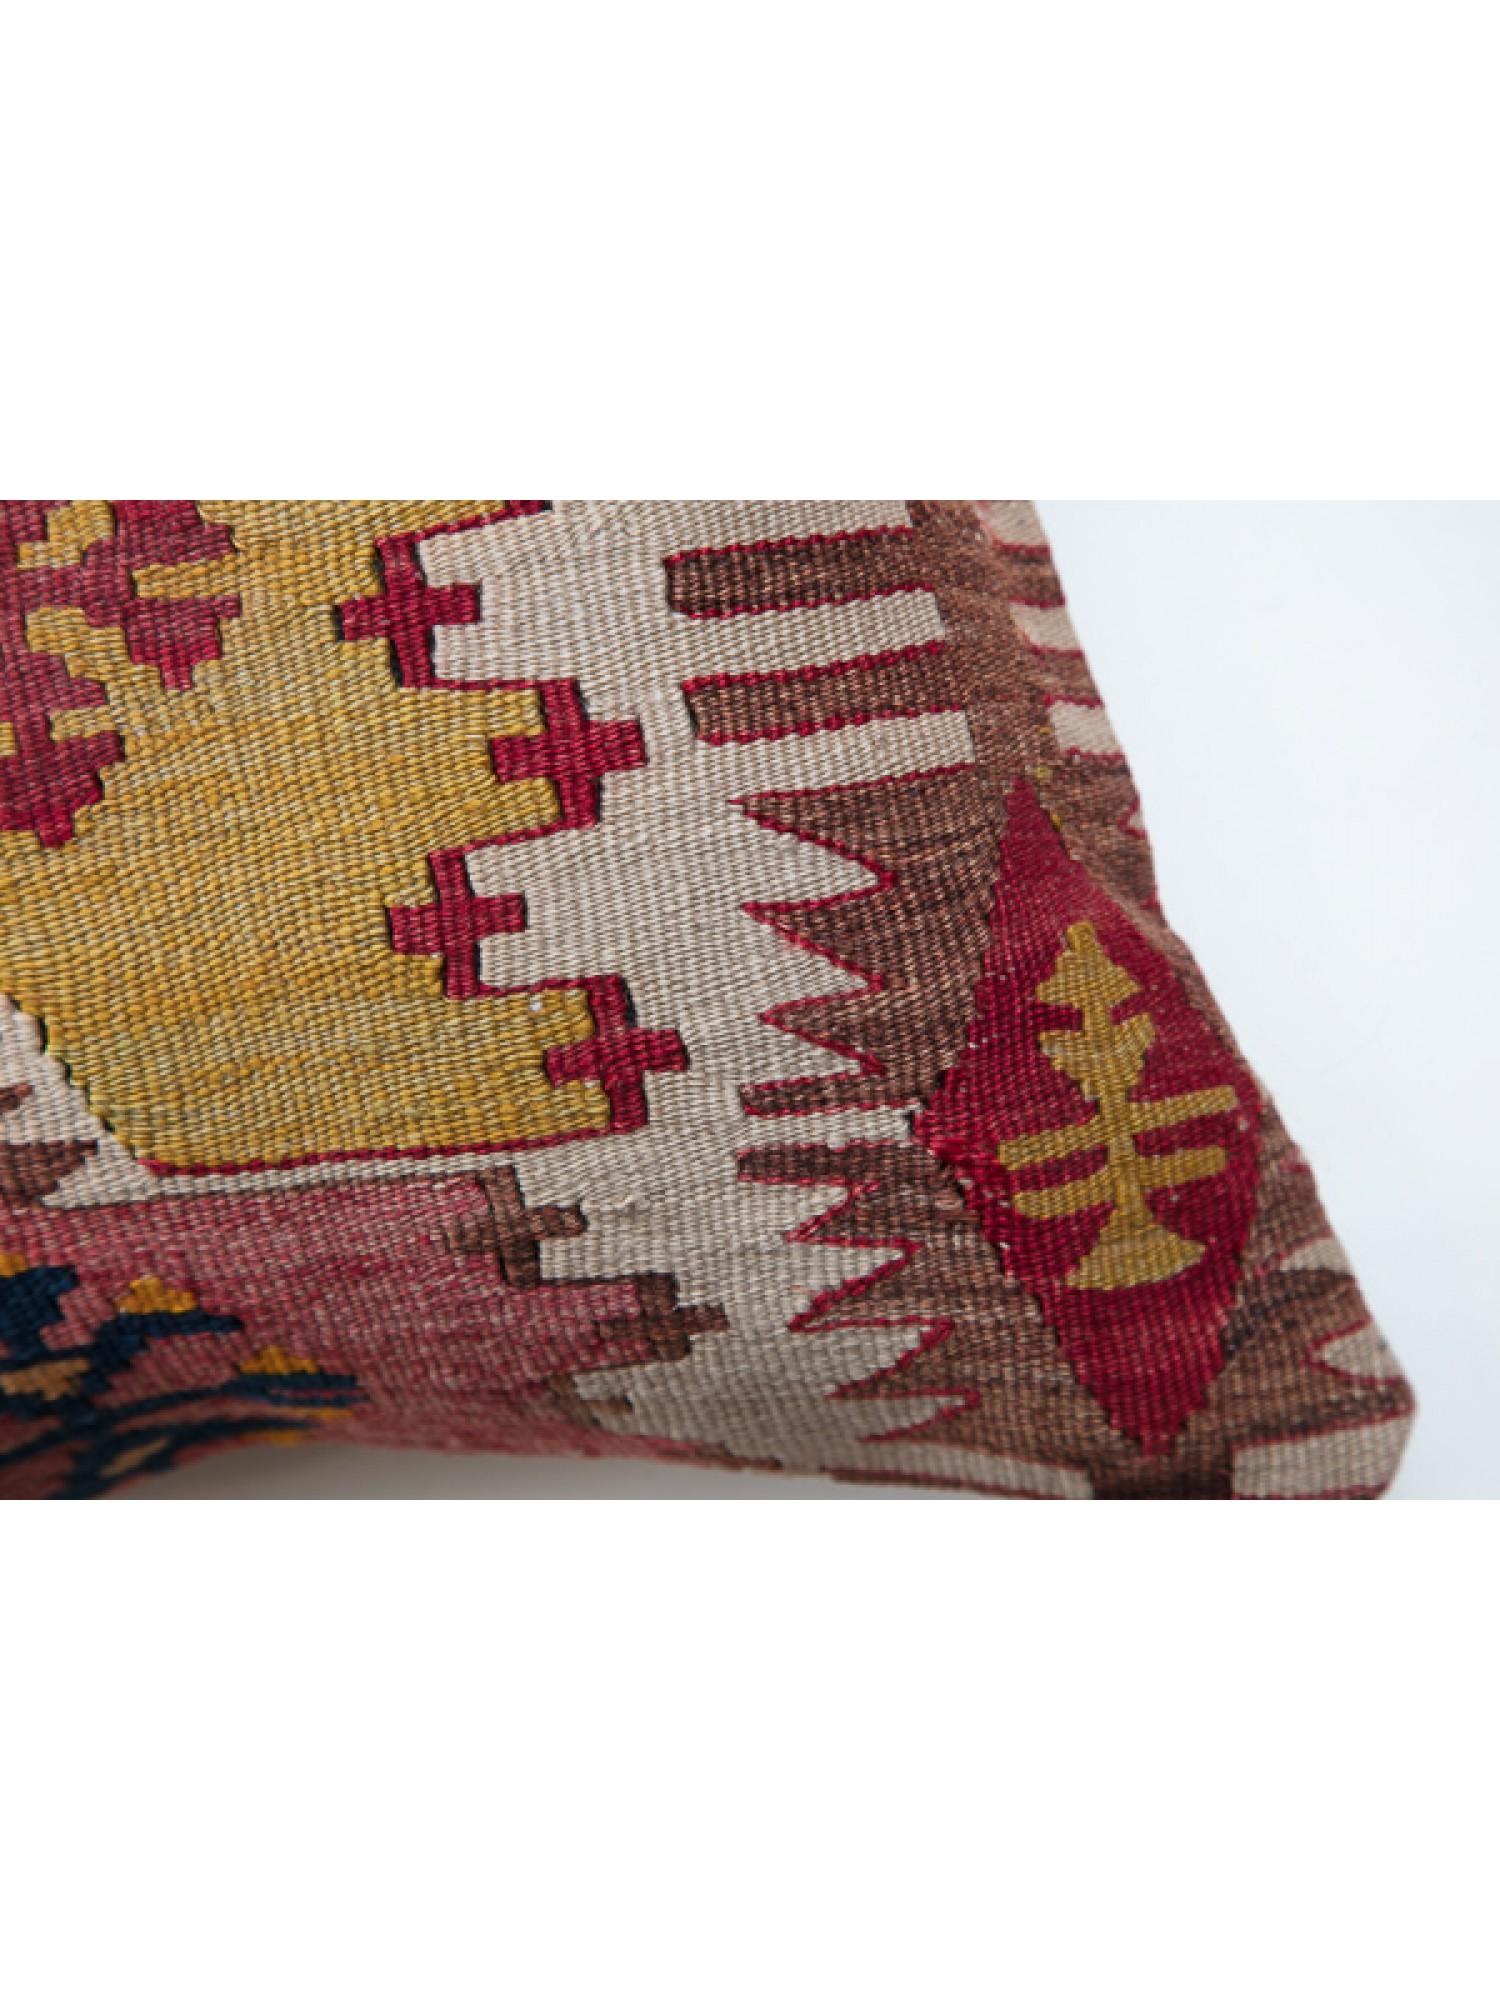 Contemporary Antique & Old Kilim Cushion Cover, Anatolian Yastik Turkish Modern Pillow KC3494 For Sale